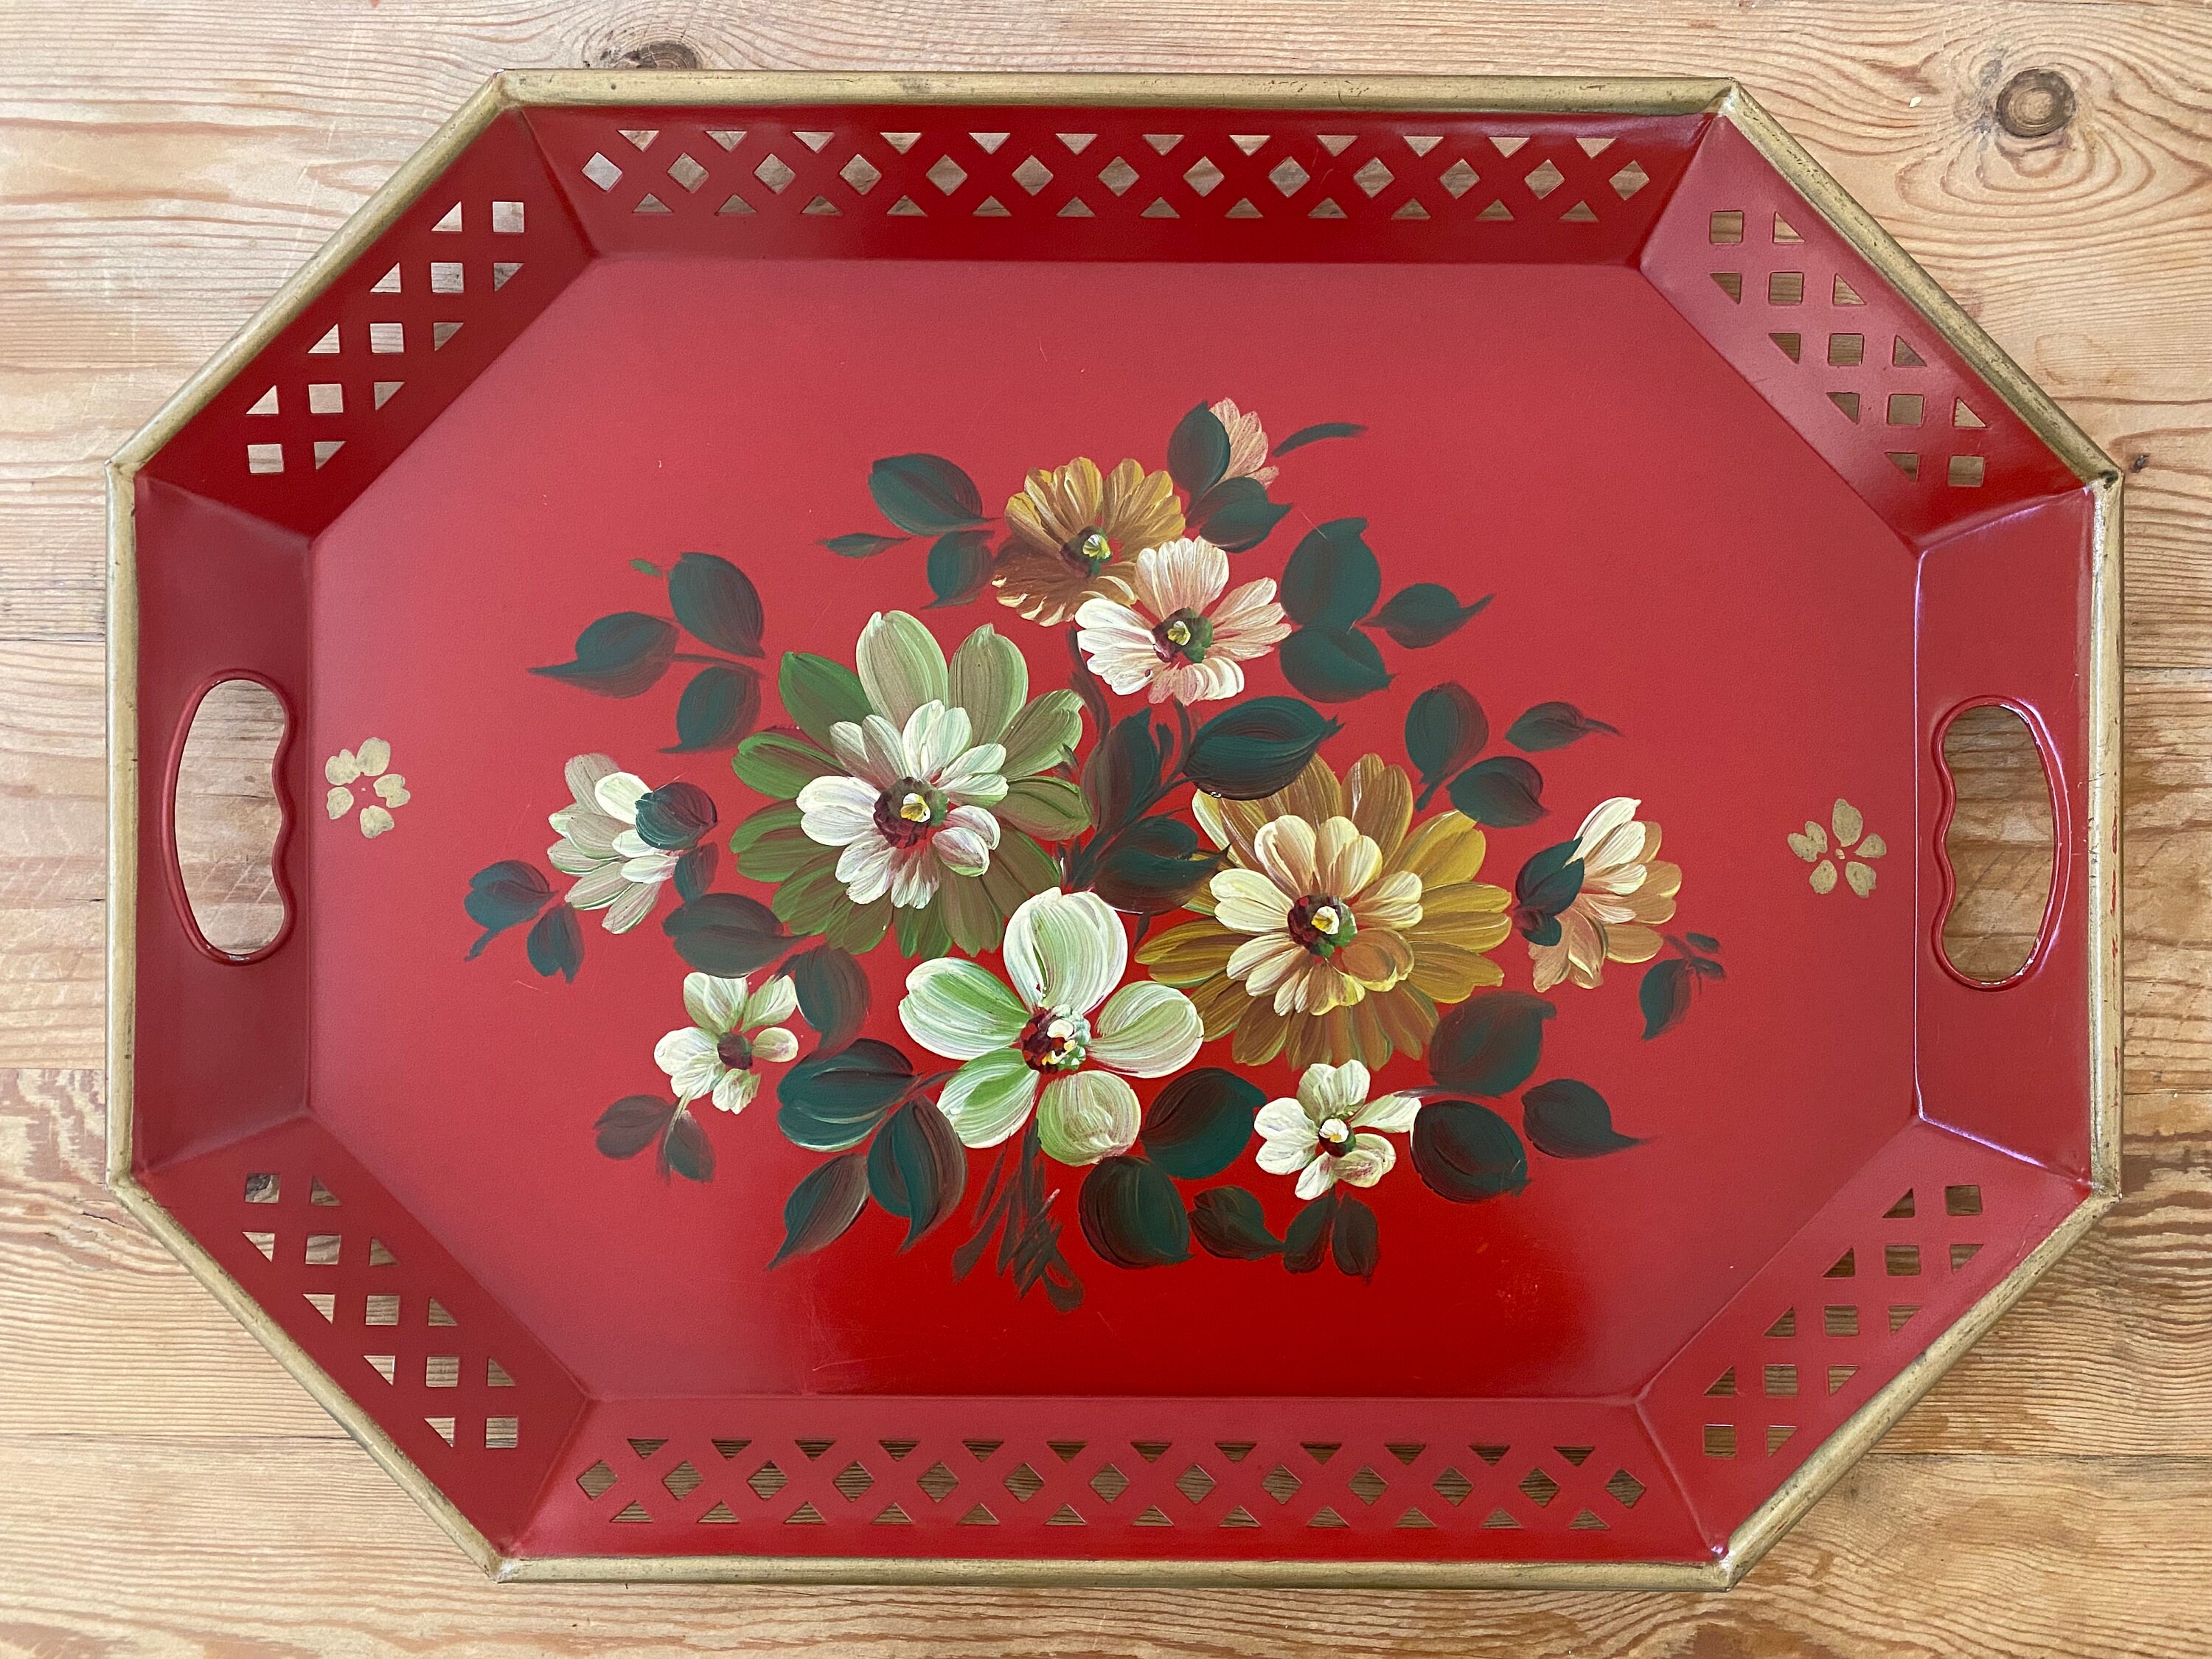 Tole Metal Folk Art Tray Hand Painted Floral E. T. Nash Company